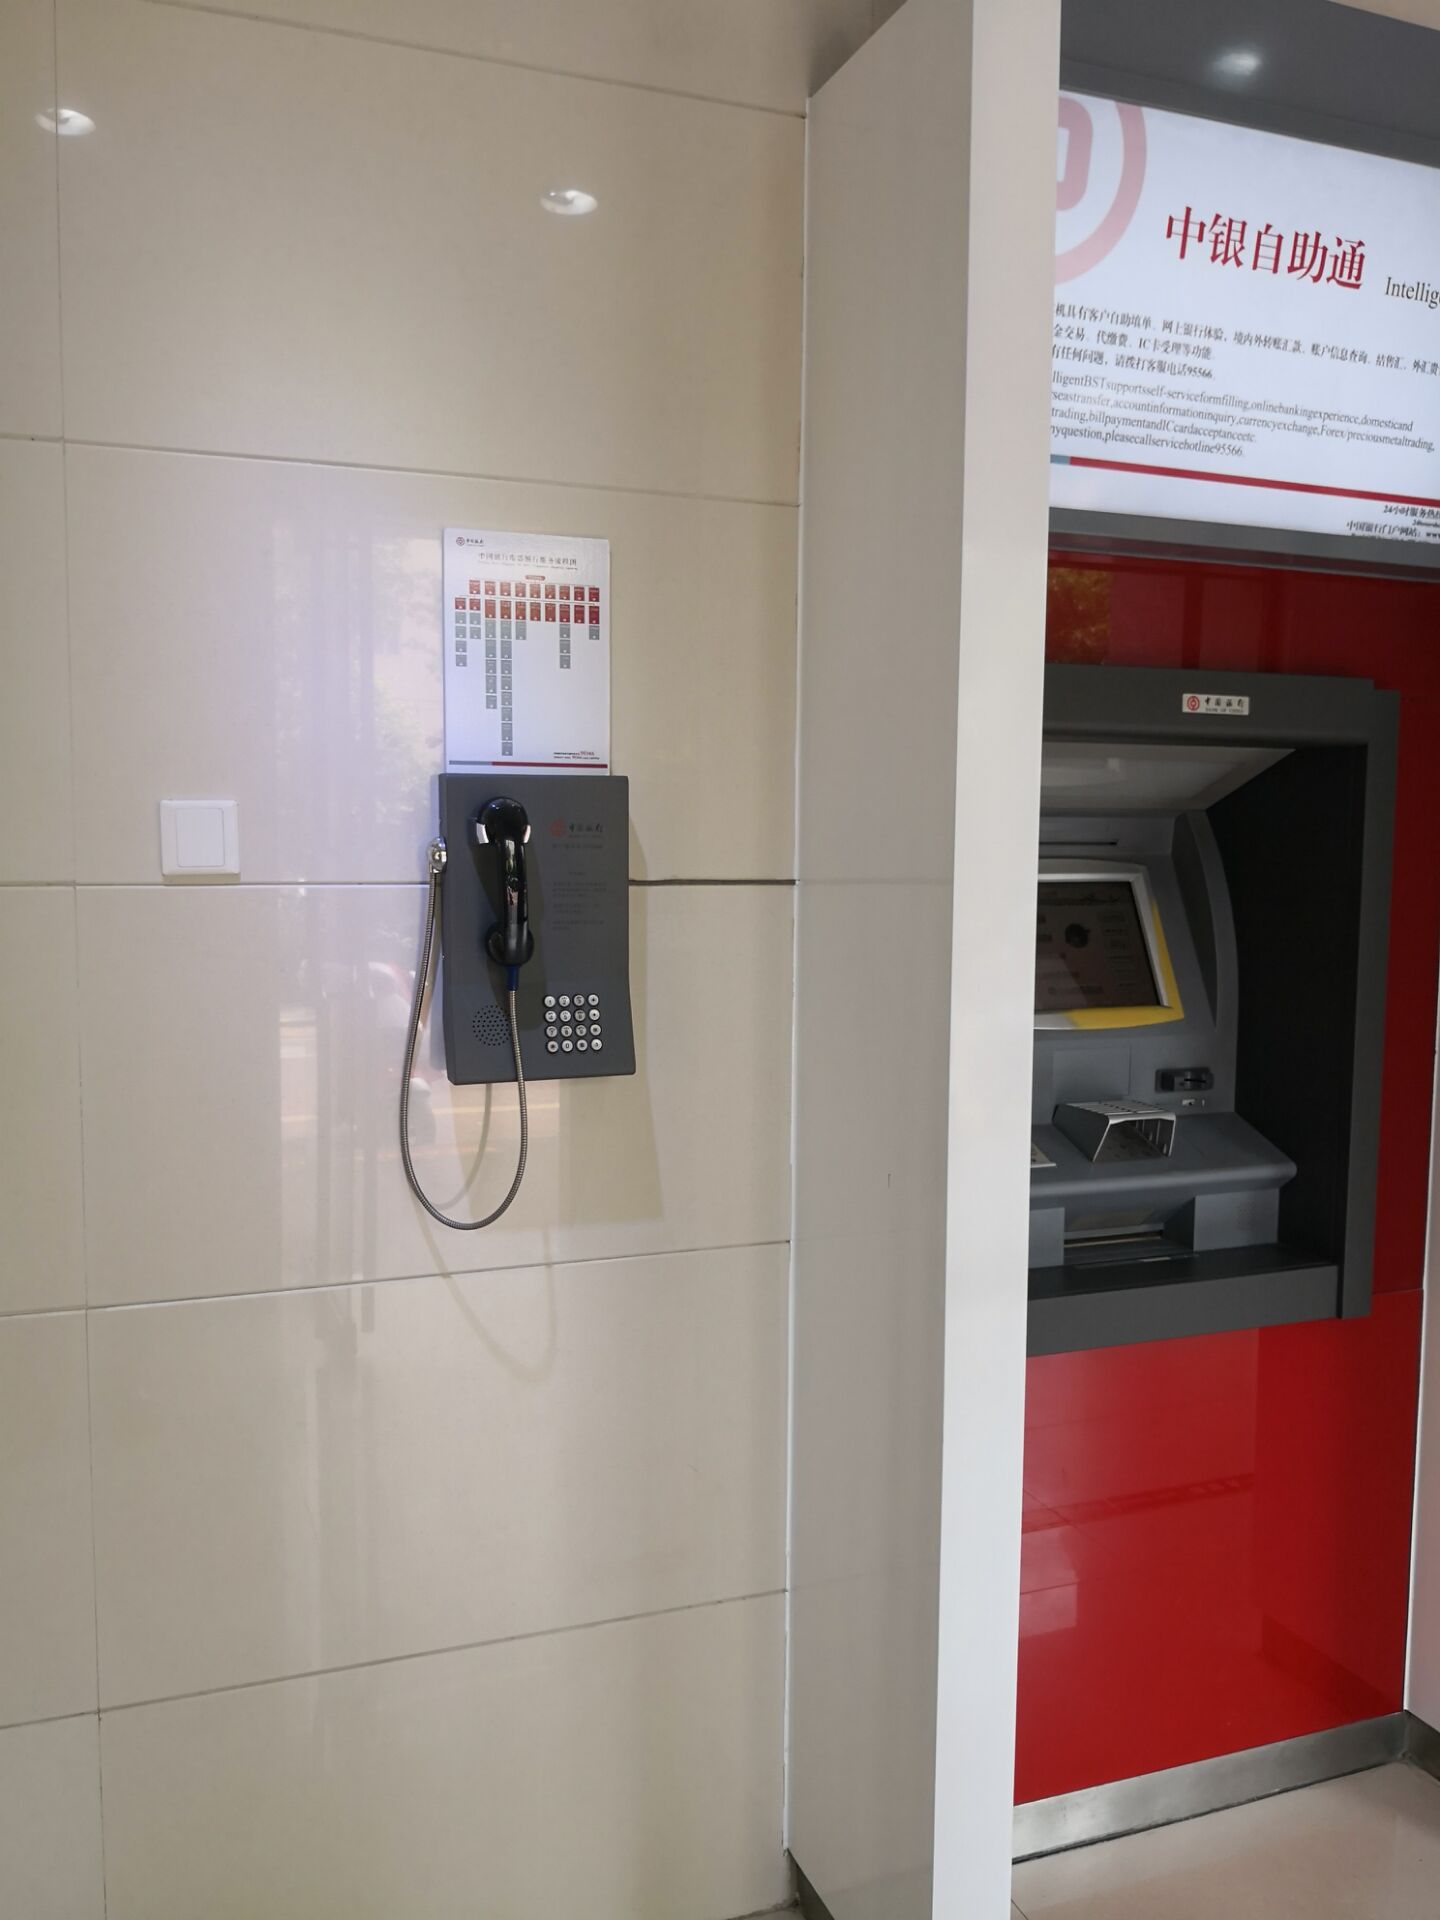 LCD Bank service telephone